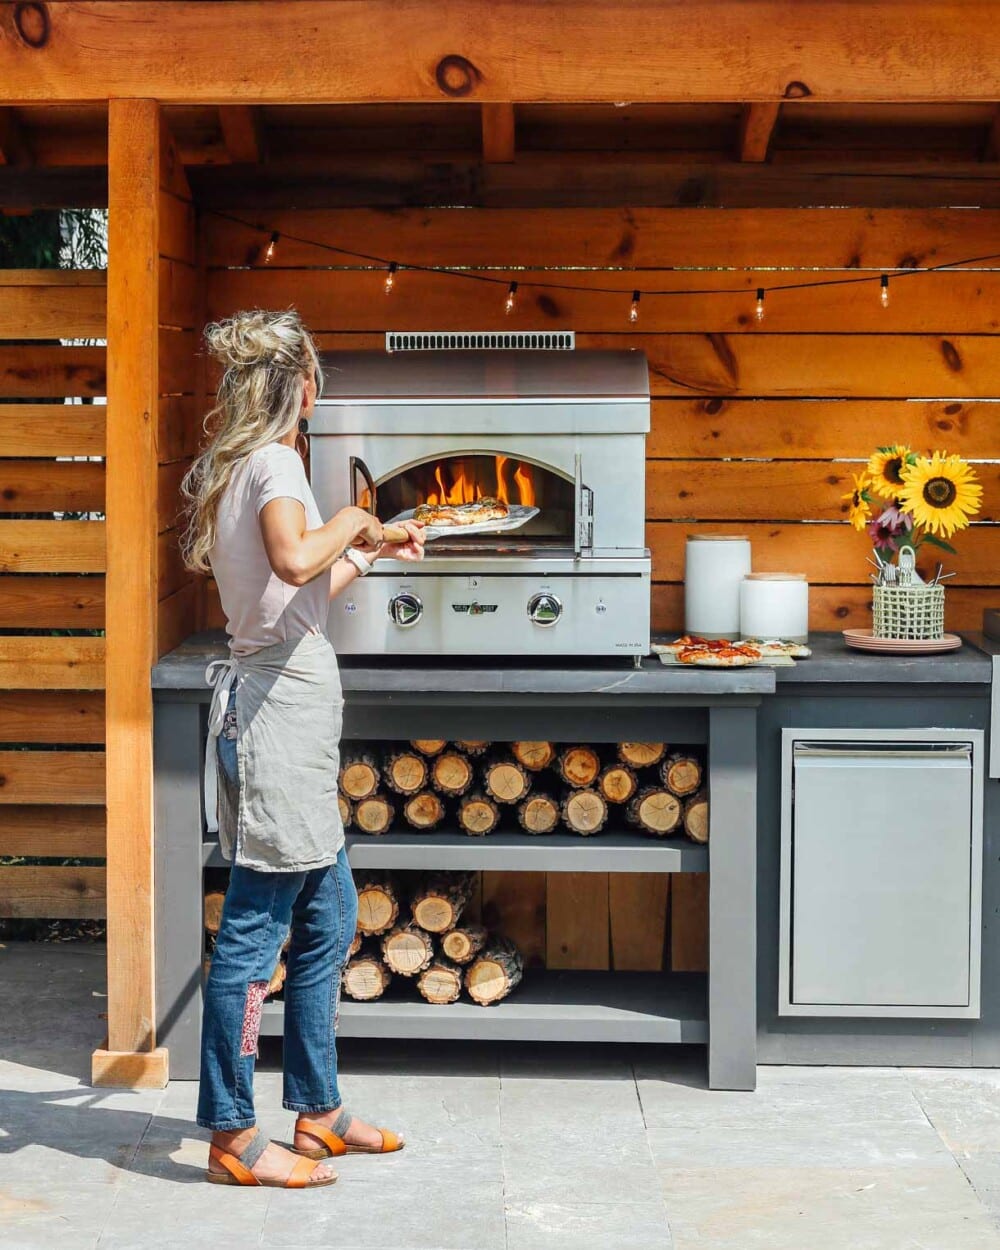 blond woman putting pizza into an outdoor pizza oven